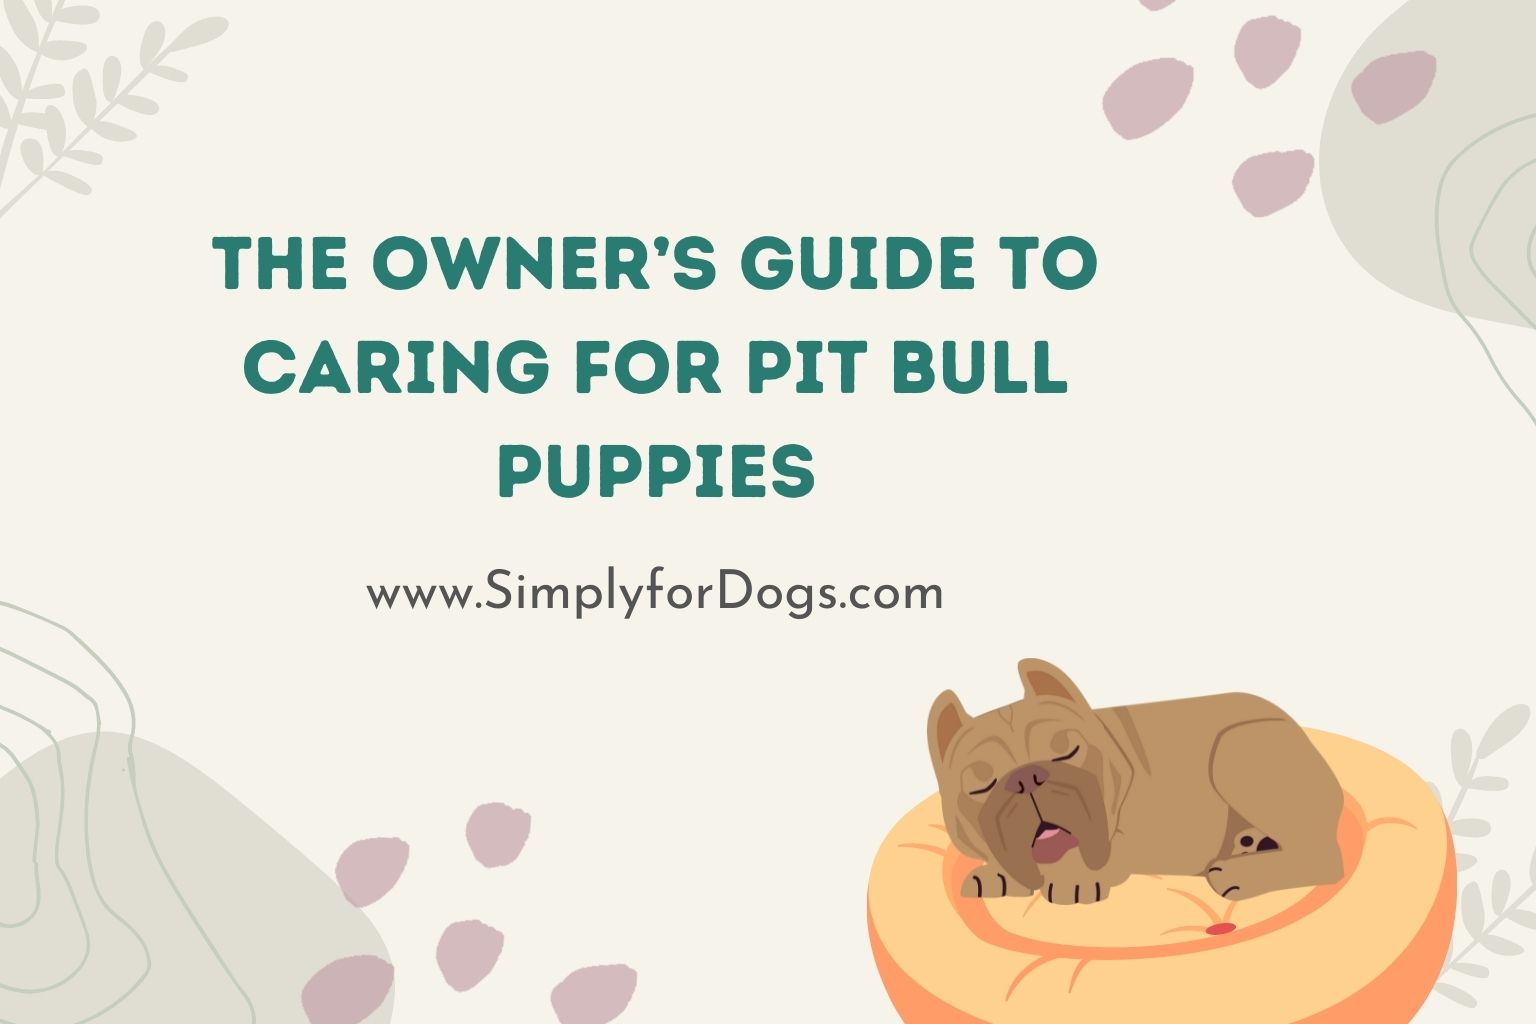 The Owner’s Guide to Caring for Pit Bull Puppies